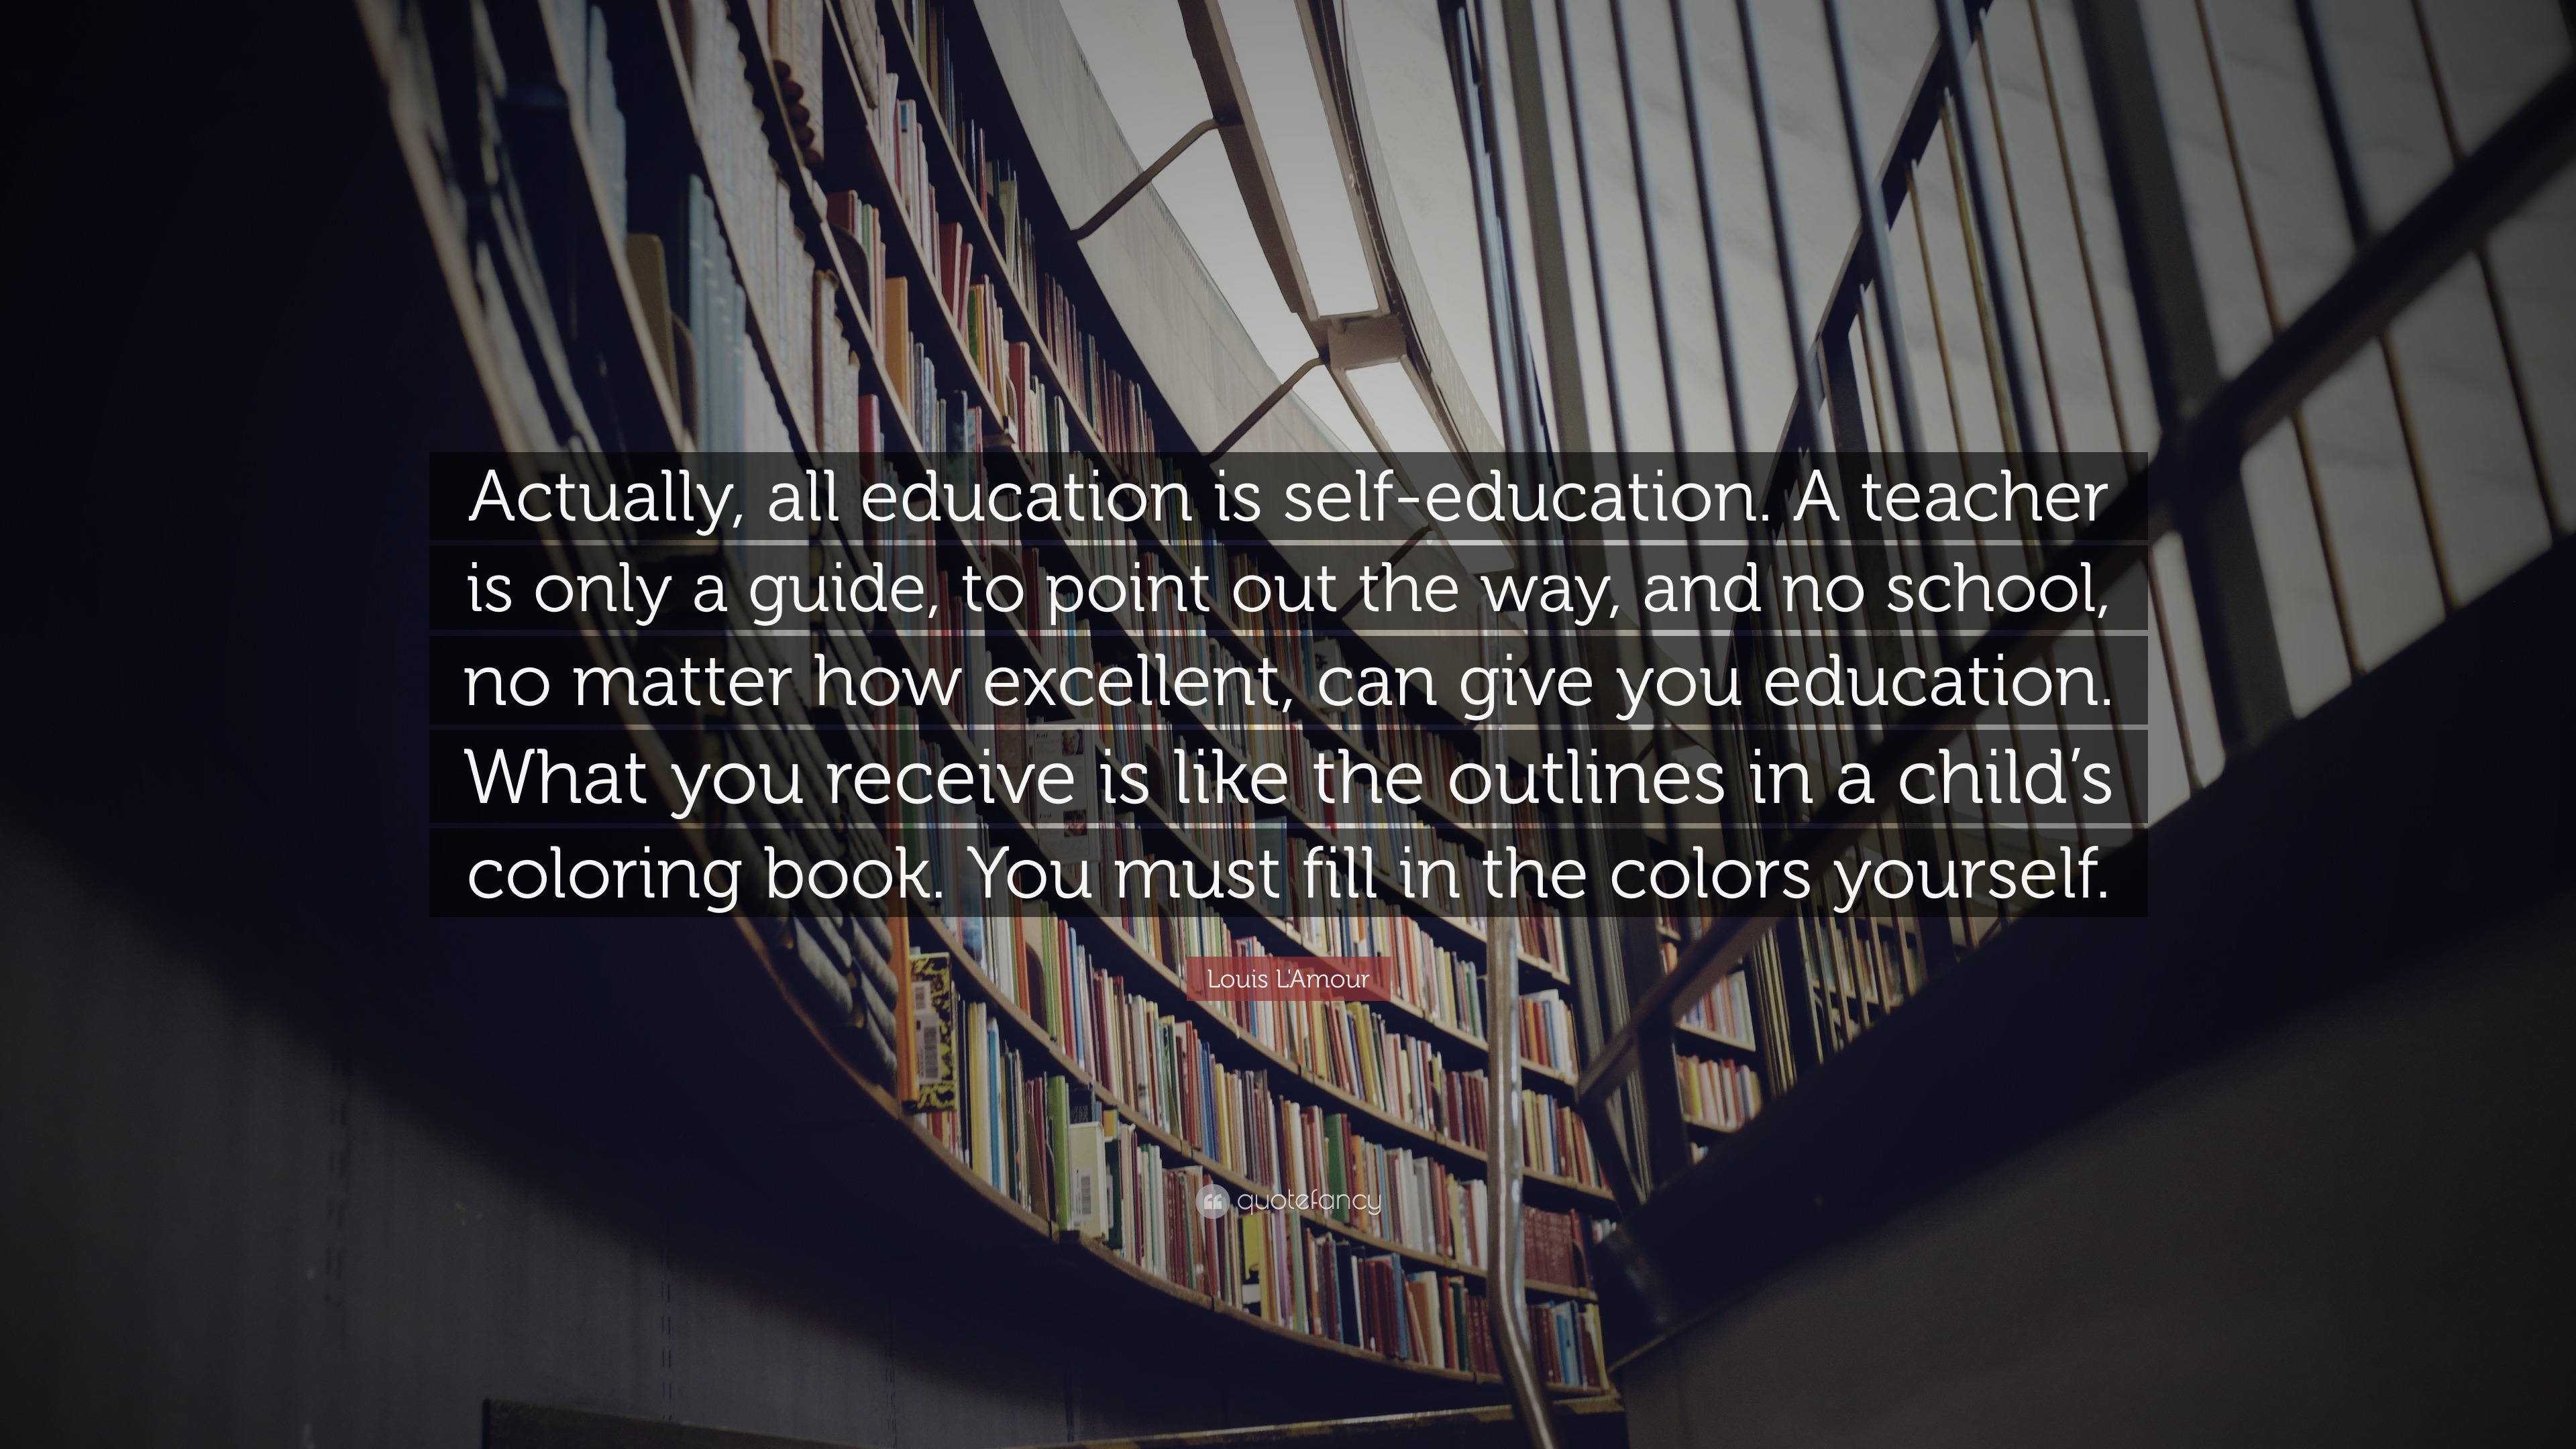 Louis L'Amour Quote: “Actually, all education is self-education. A teacher  is only a guide, to point out the way, and no school, no matter how...”